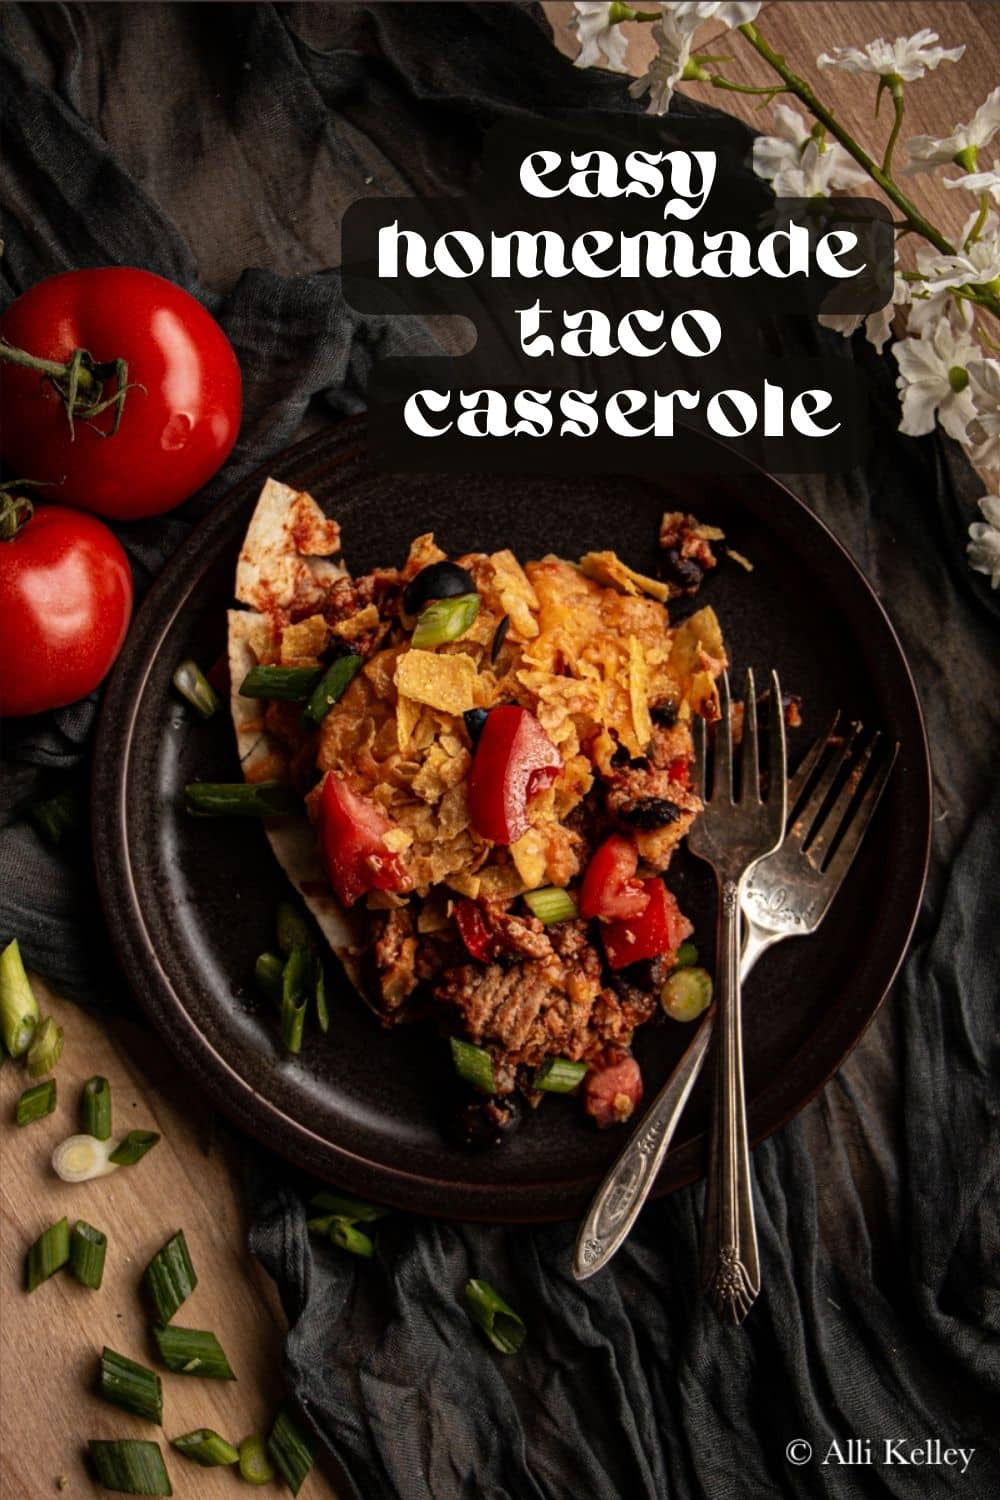 Do you love tacos but want to save time filling each individual tortilla? Then this easy taco casserole is the perfect solution! My tasty taco bake casserole packs all the flavors of tacos into one delicious, cheesy dish. Top with your favorite taco toppings, and you’ll have a delicious taco night dinner in no time!